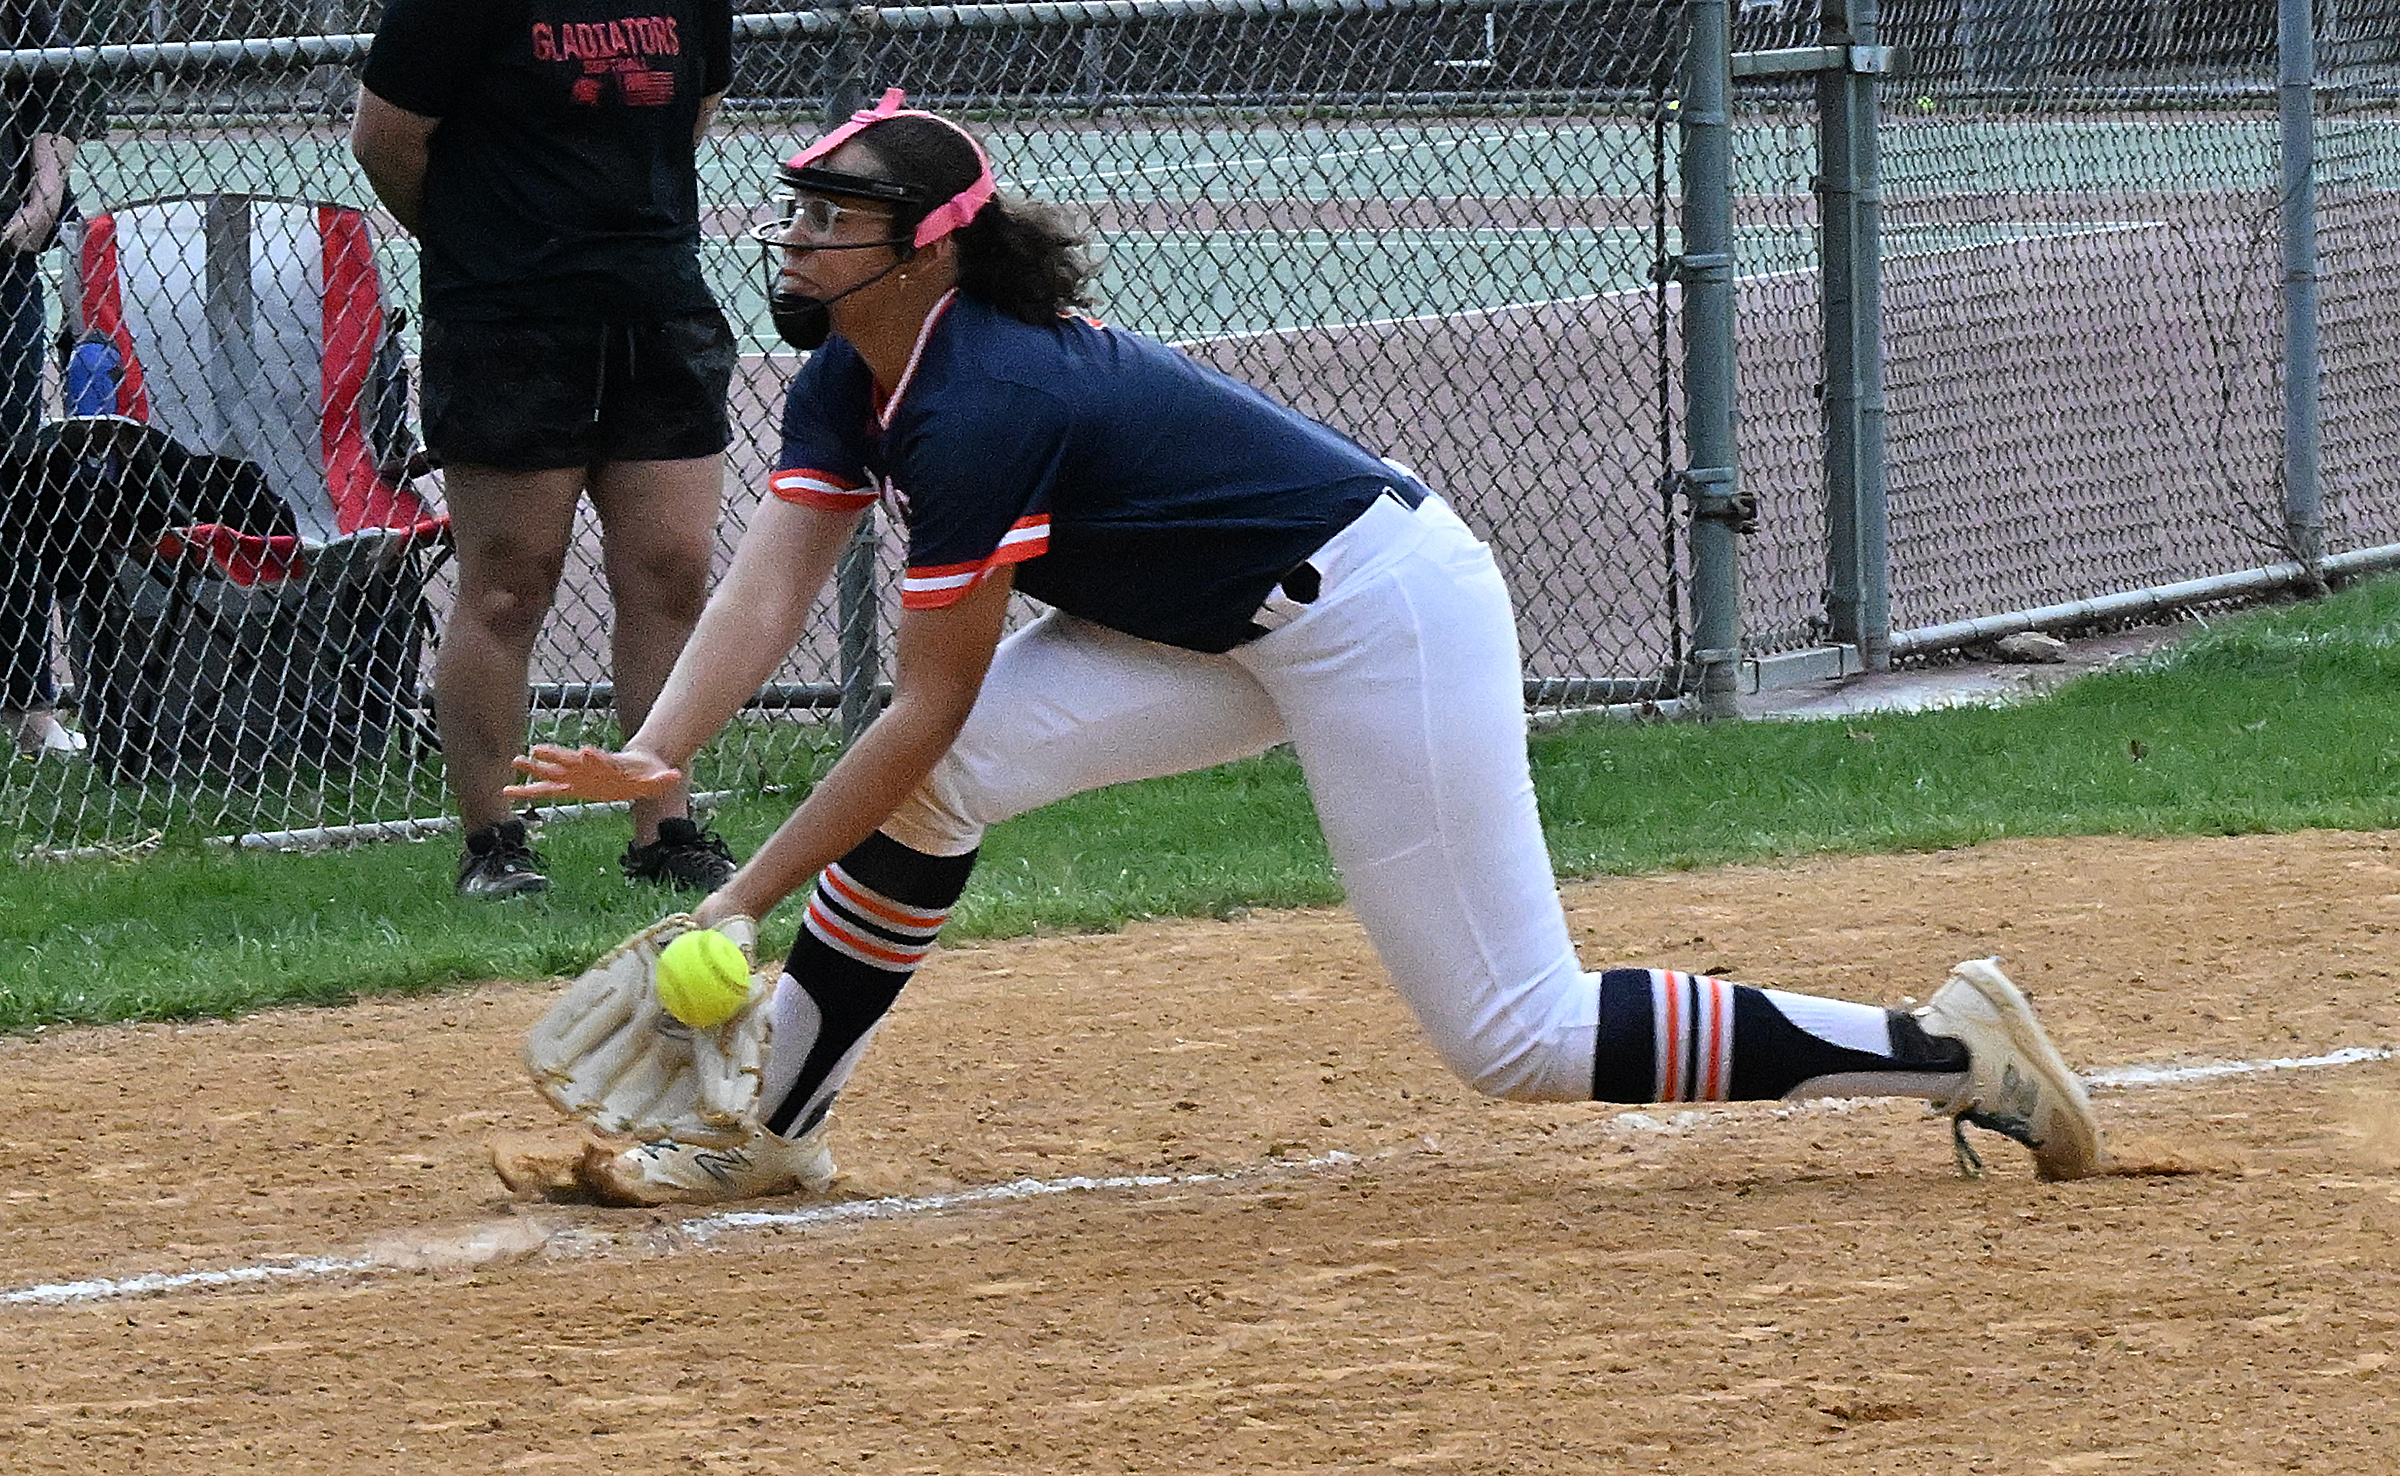 Reservoir 3rd baseman #7, Daiye Smith can't make a play on a shot down the line in the 3rd inning. Reservoir vs. Glenelg softball at Reservoir High School. The Gladiators edged the Gators 6-4. (Jeffrey F. Bill/Staff photo)